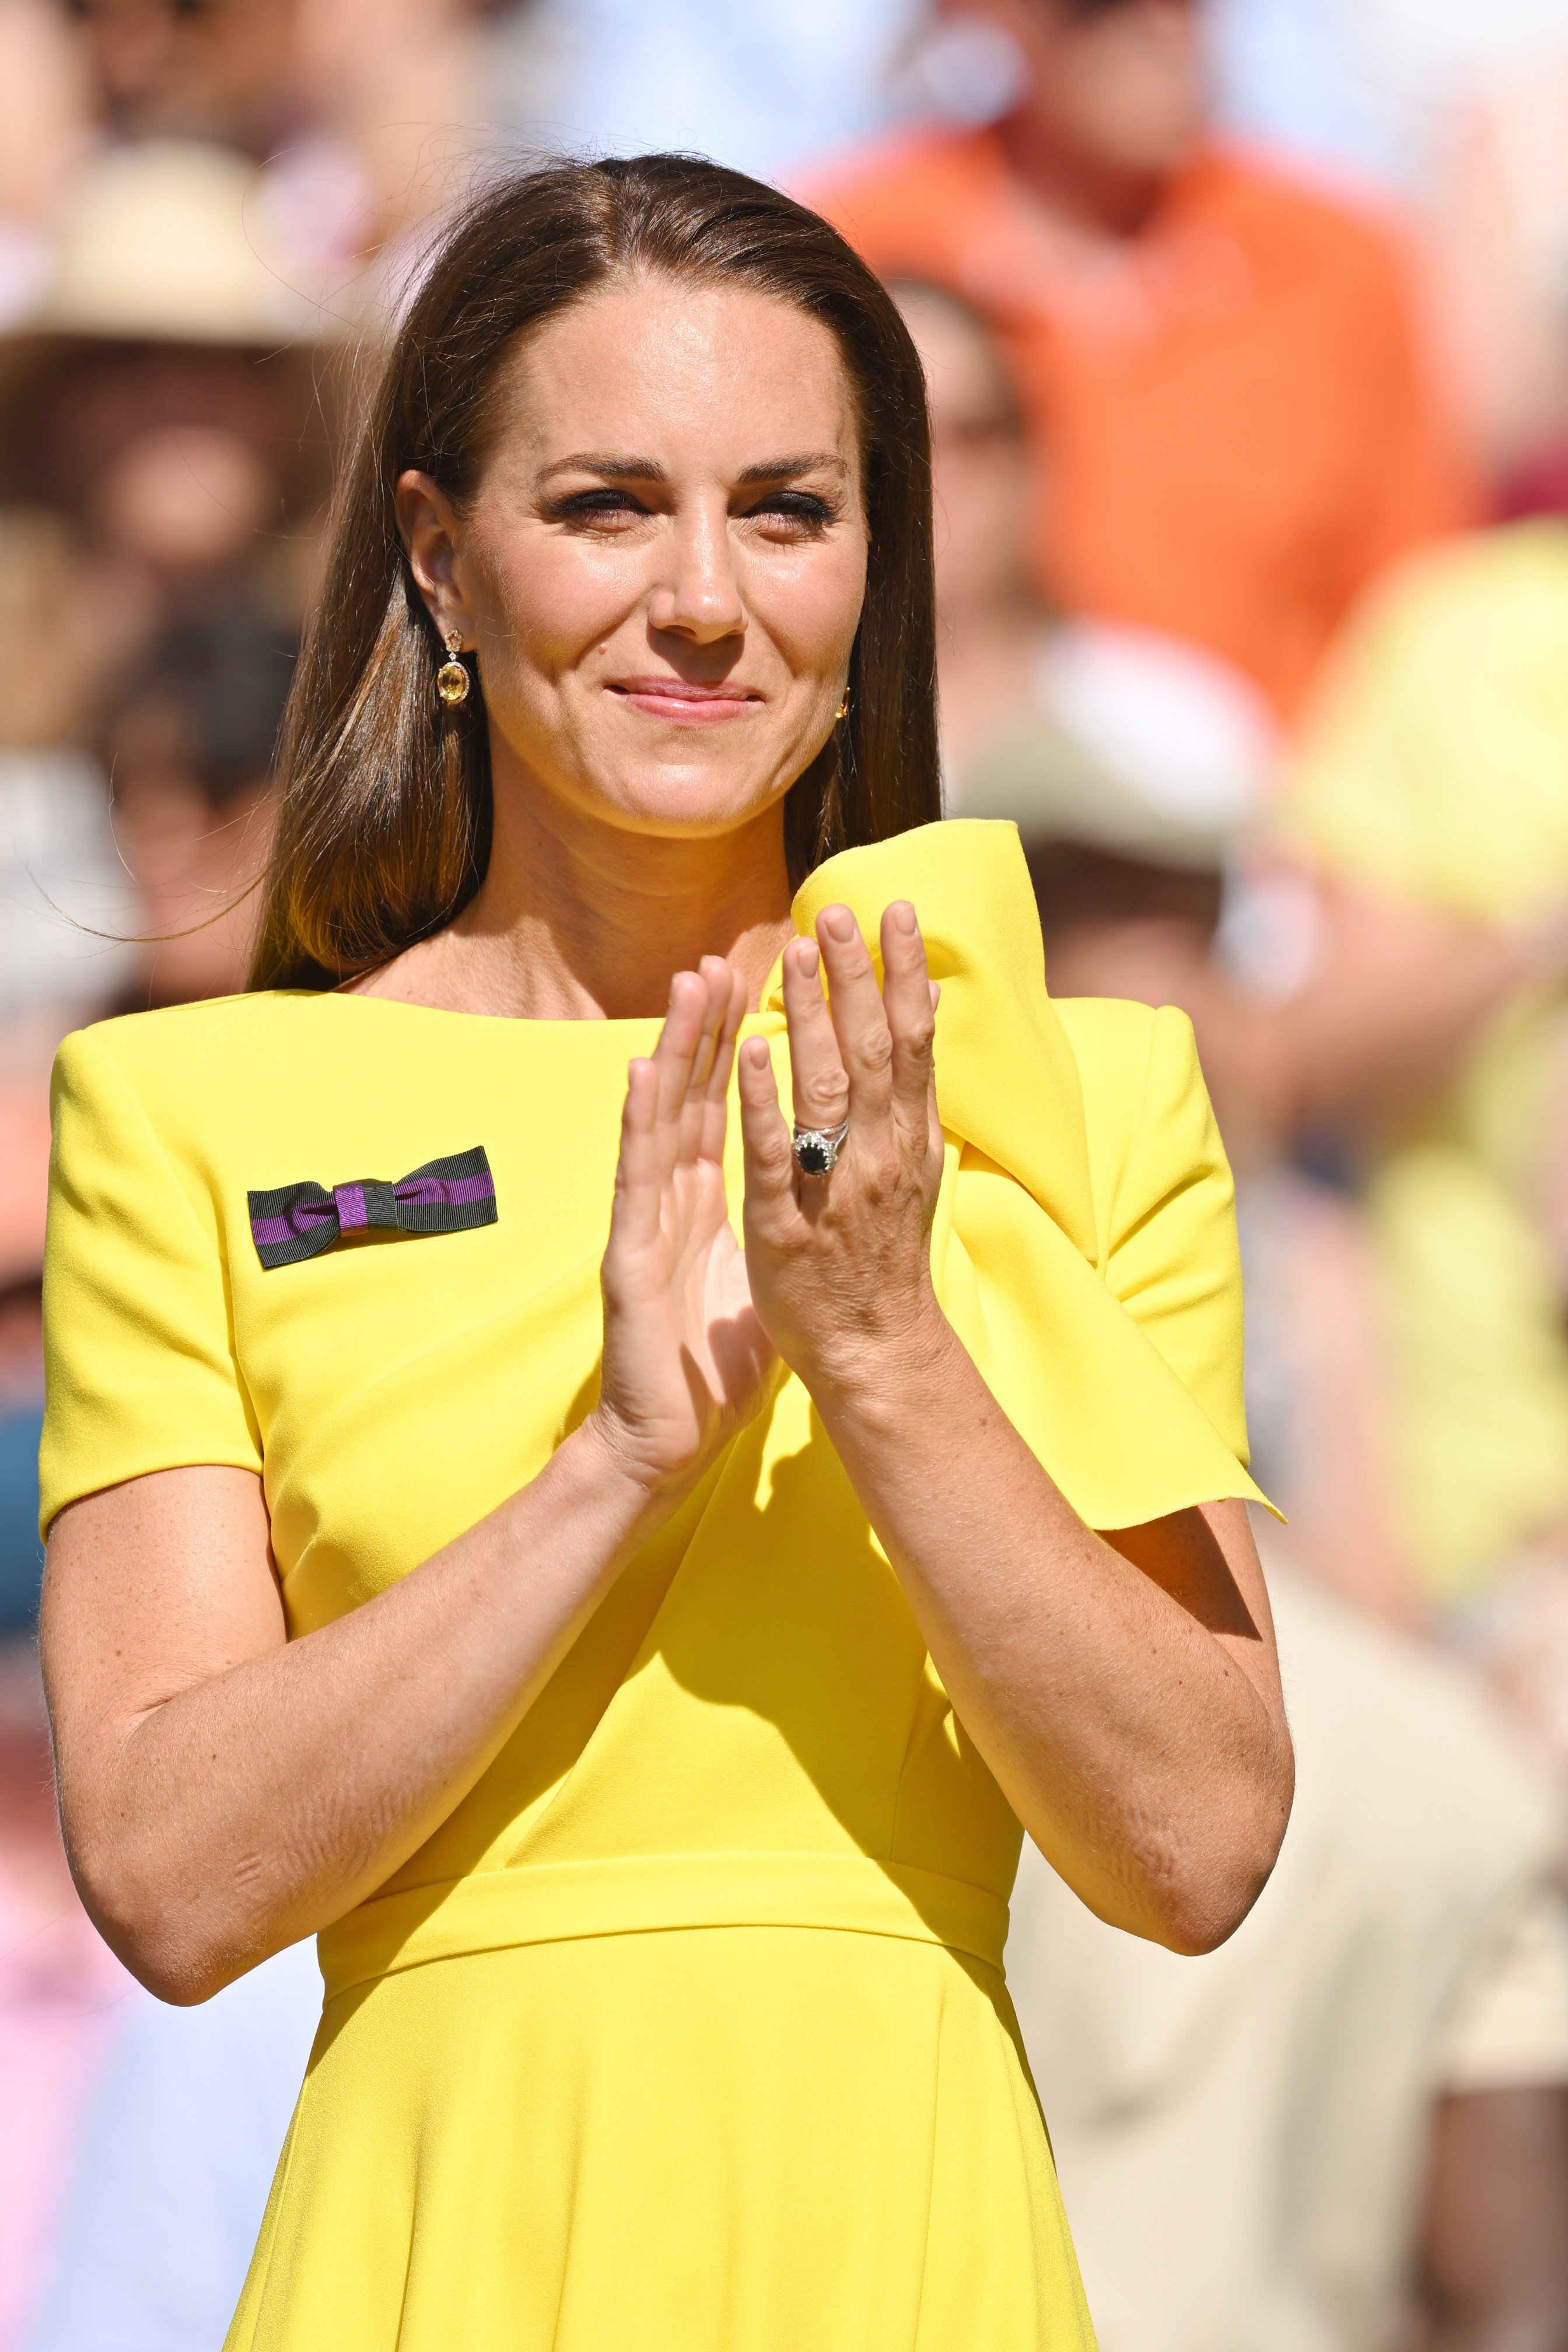     Catherine, Duchess of Cambridge during the Wimbledon Women's Singles Final at All England Lawn Tennis and Croquet Club on July 09, 2022 in London, England.  |  Source: Getty Images